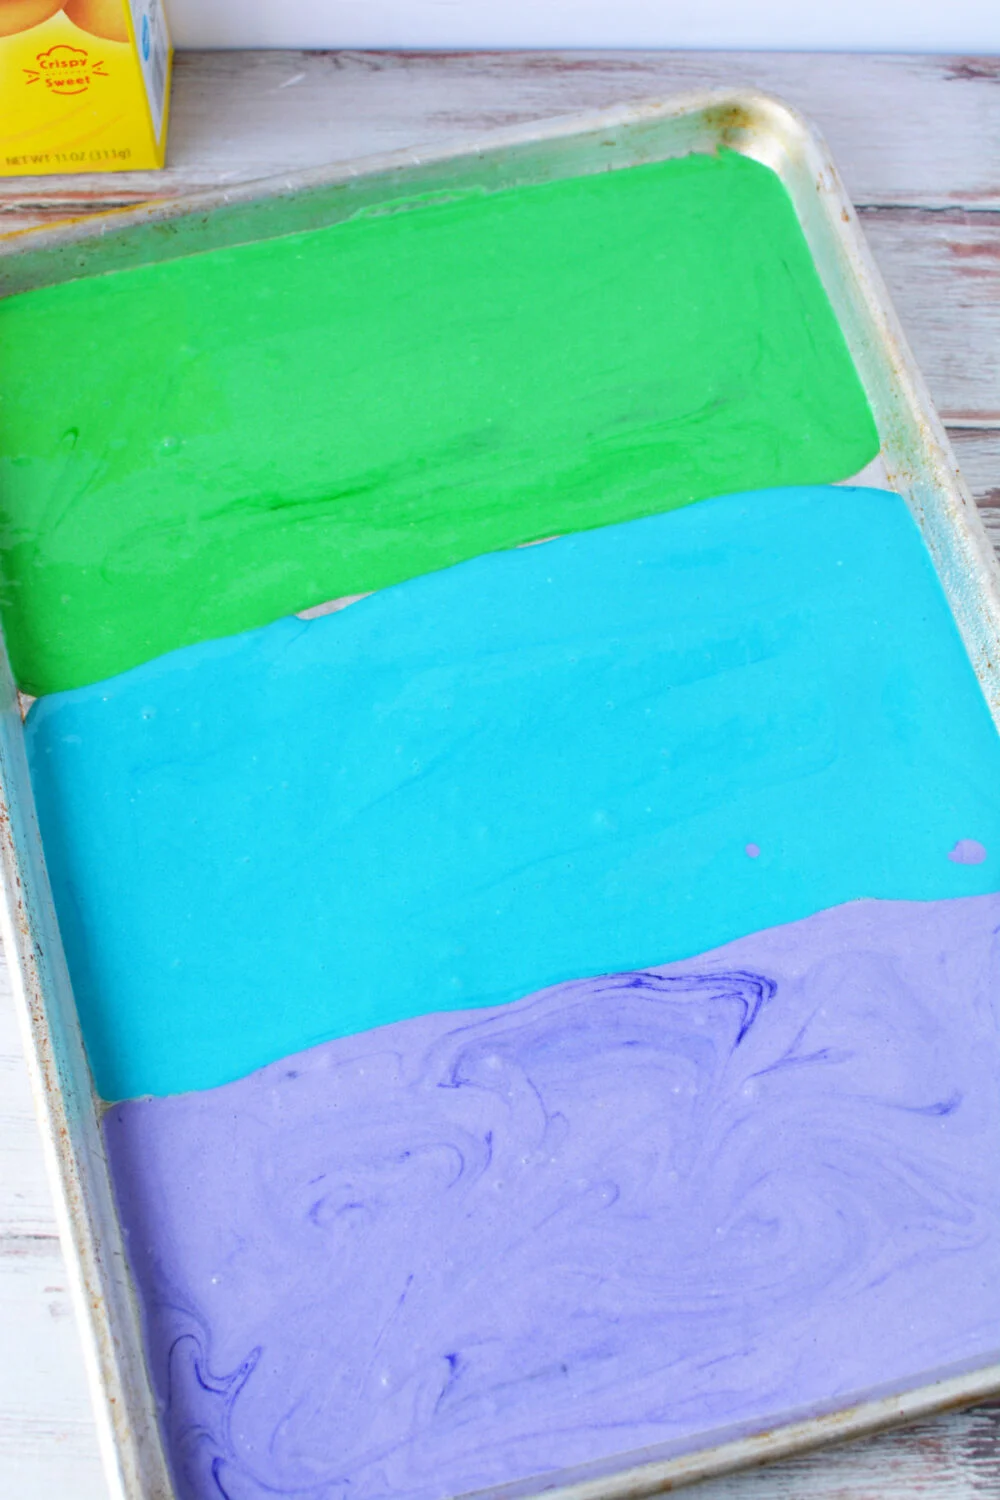 Green, blue, and purple cake batter in a baking pan.